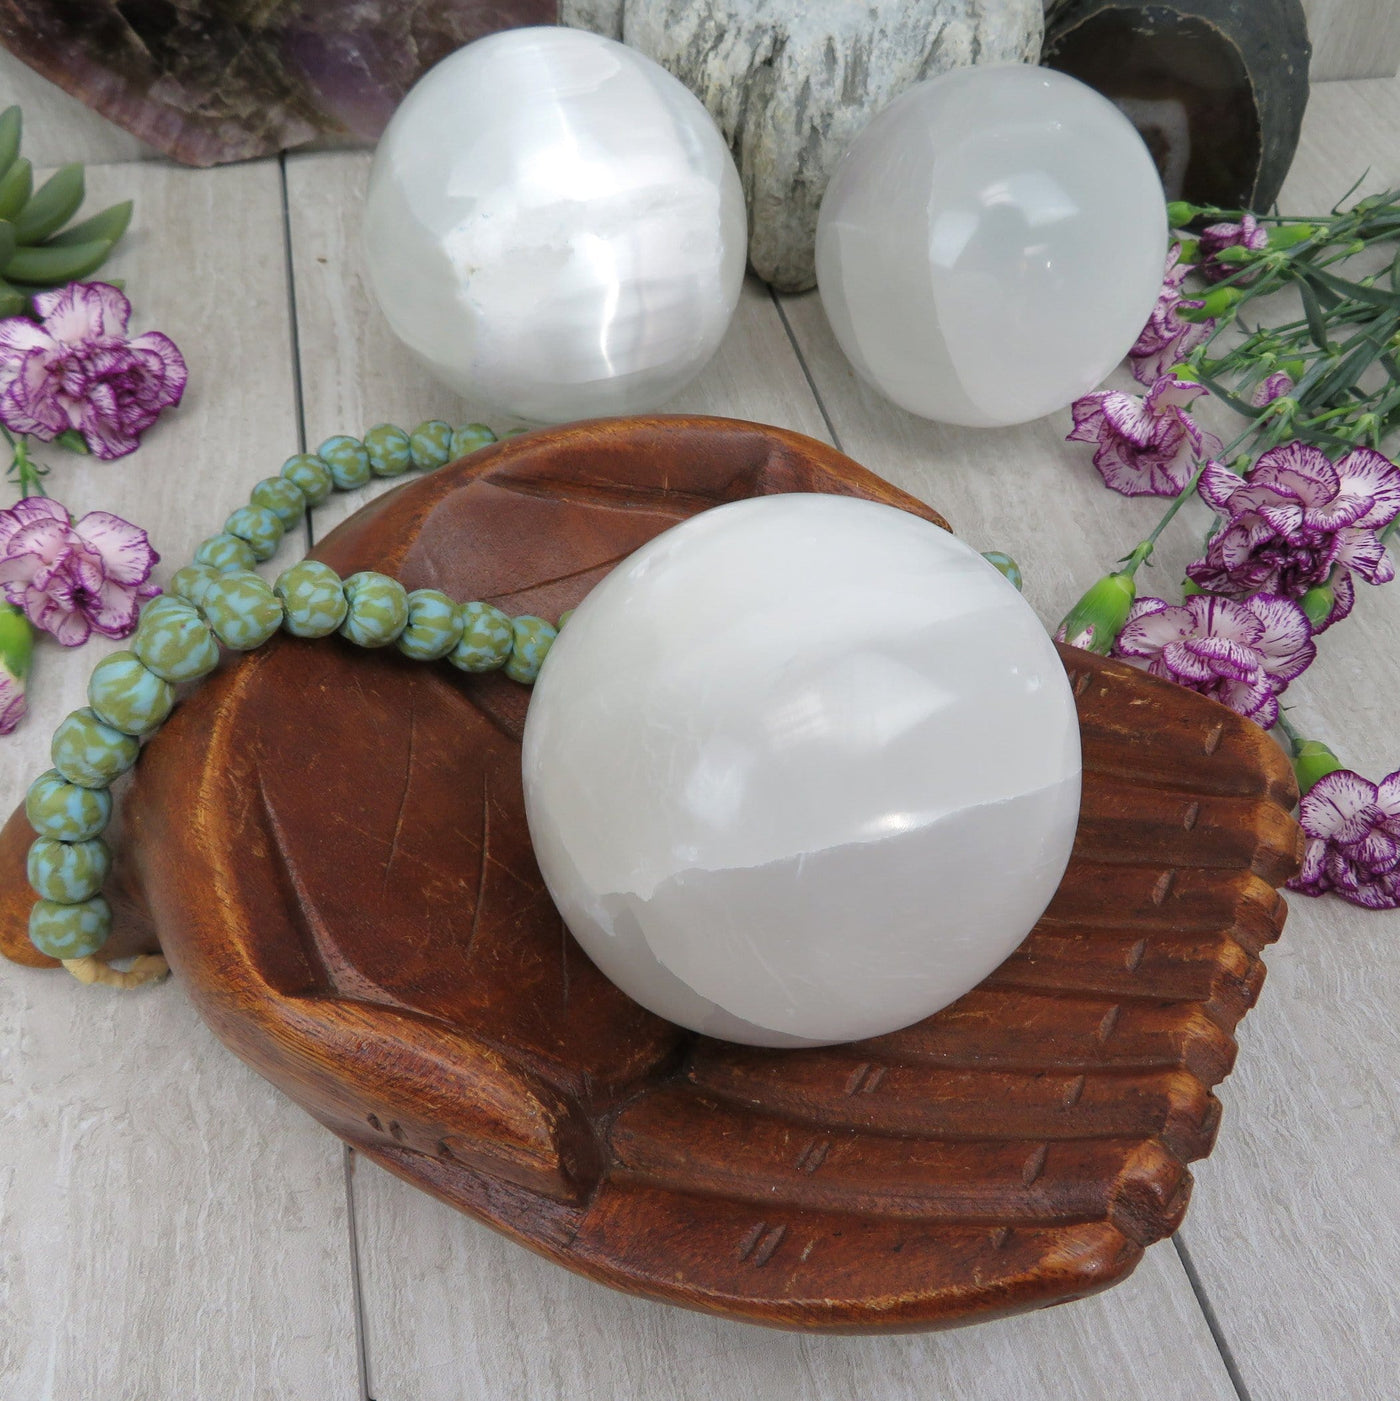 selenite sphere in wooden hand bowl with others in background display